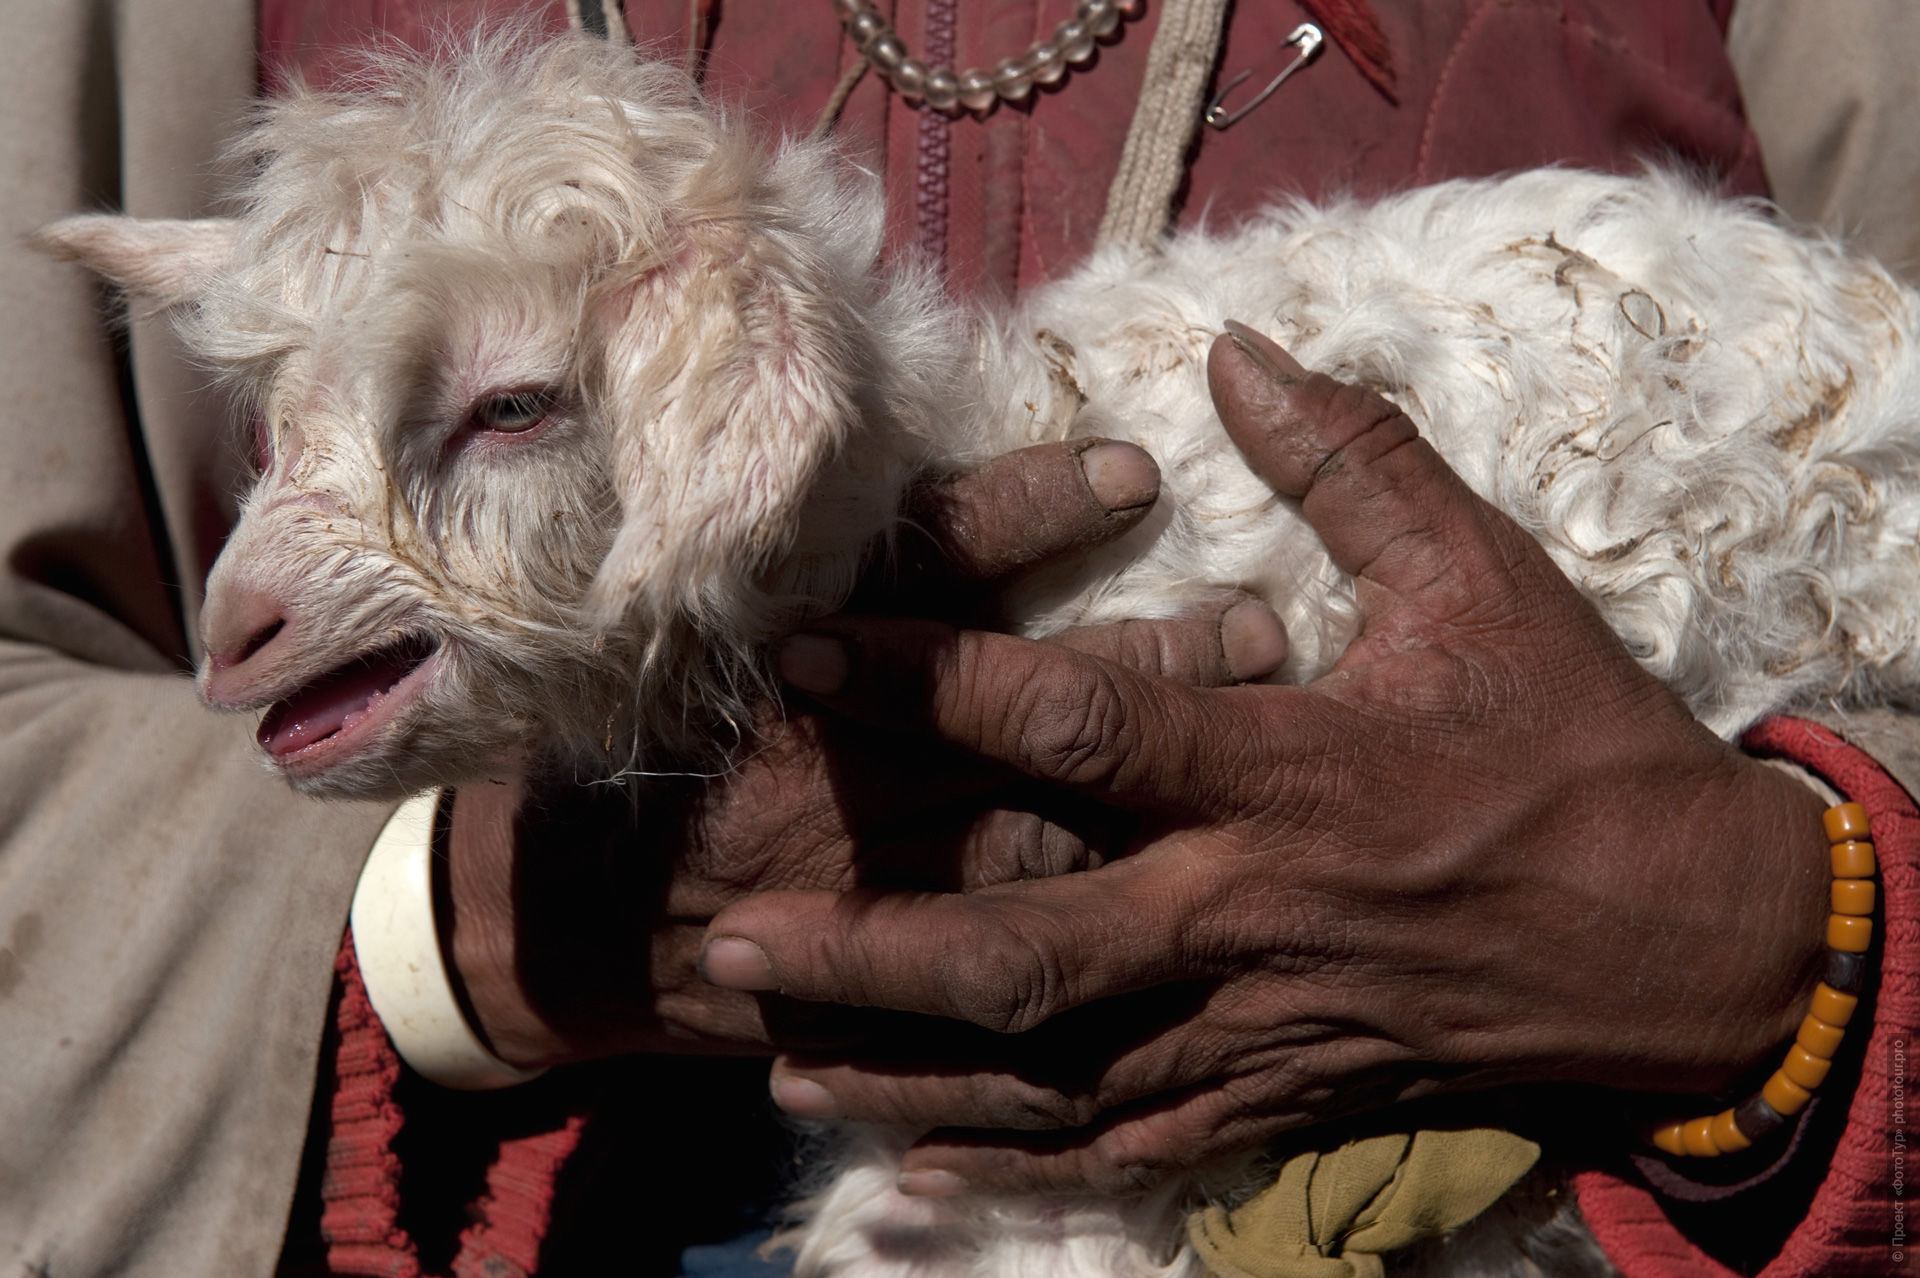 Newborn sheep on the hands of a shepherd. Photo tour to Tibet for the Winter Mysteries in Ladakh, Stok and Matho monasteries, 01.03. - 03/10/2020